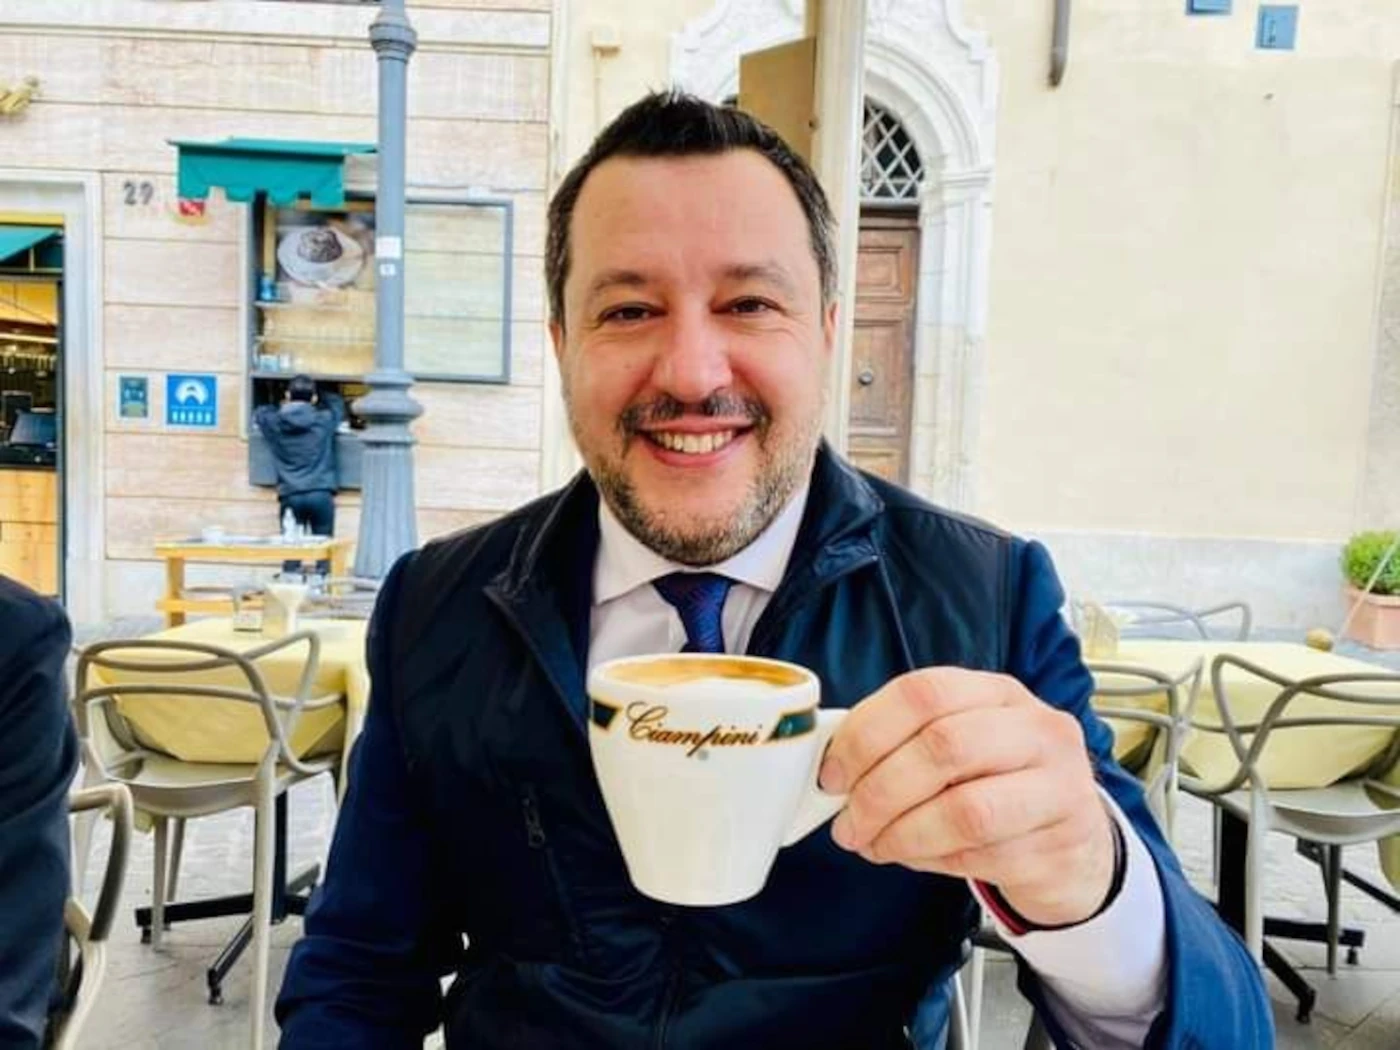 All about Matteo Salvini, who is in the eye of the political storm in Italy